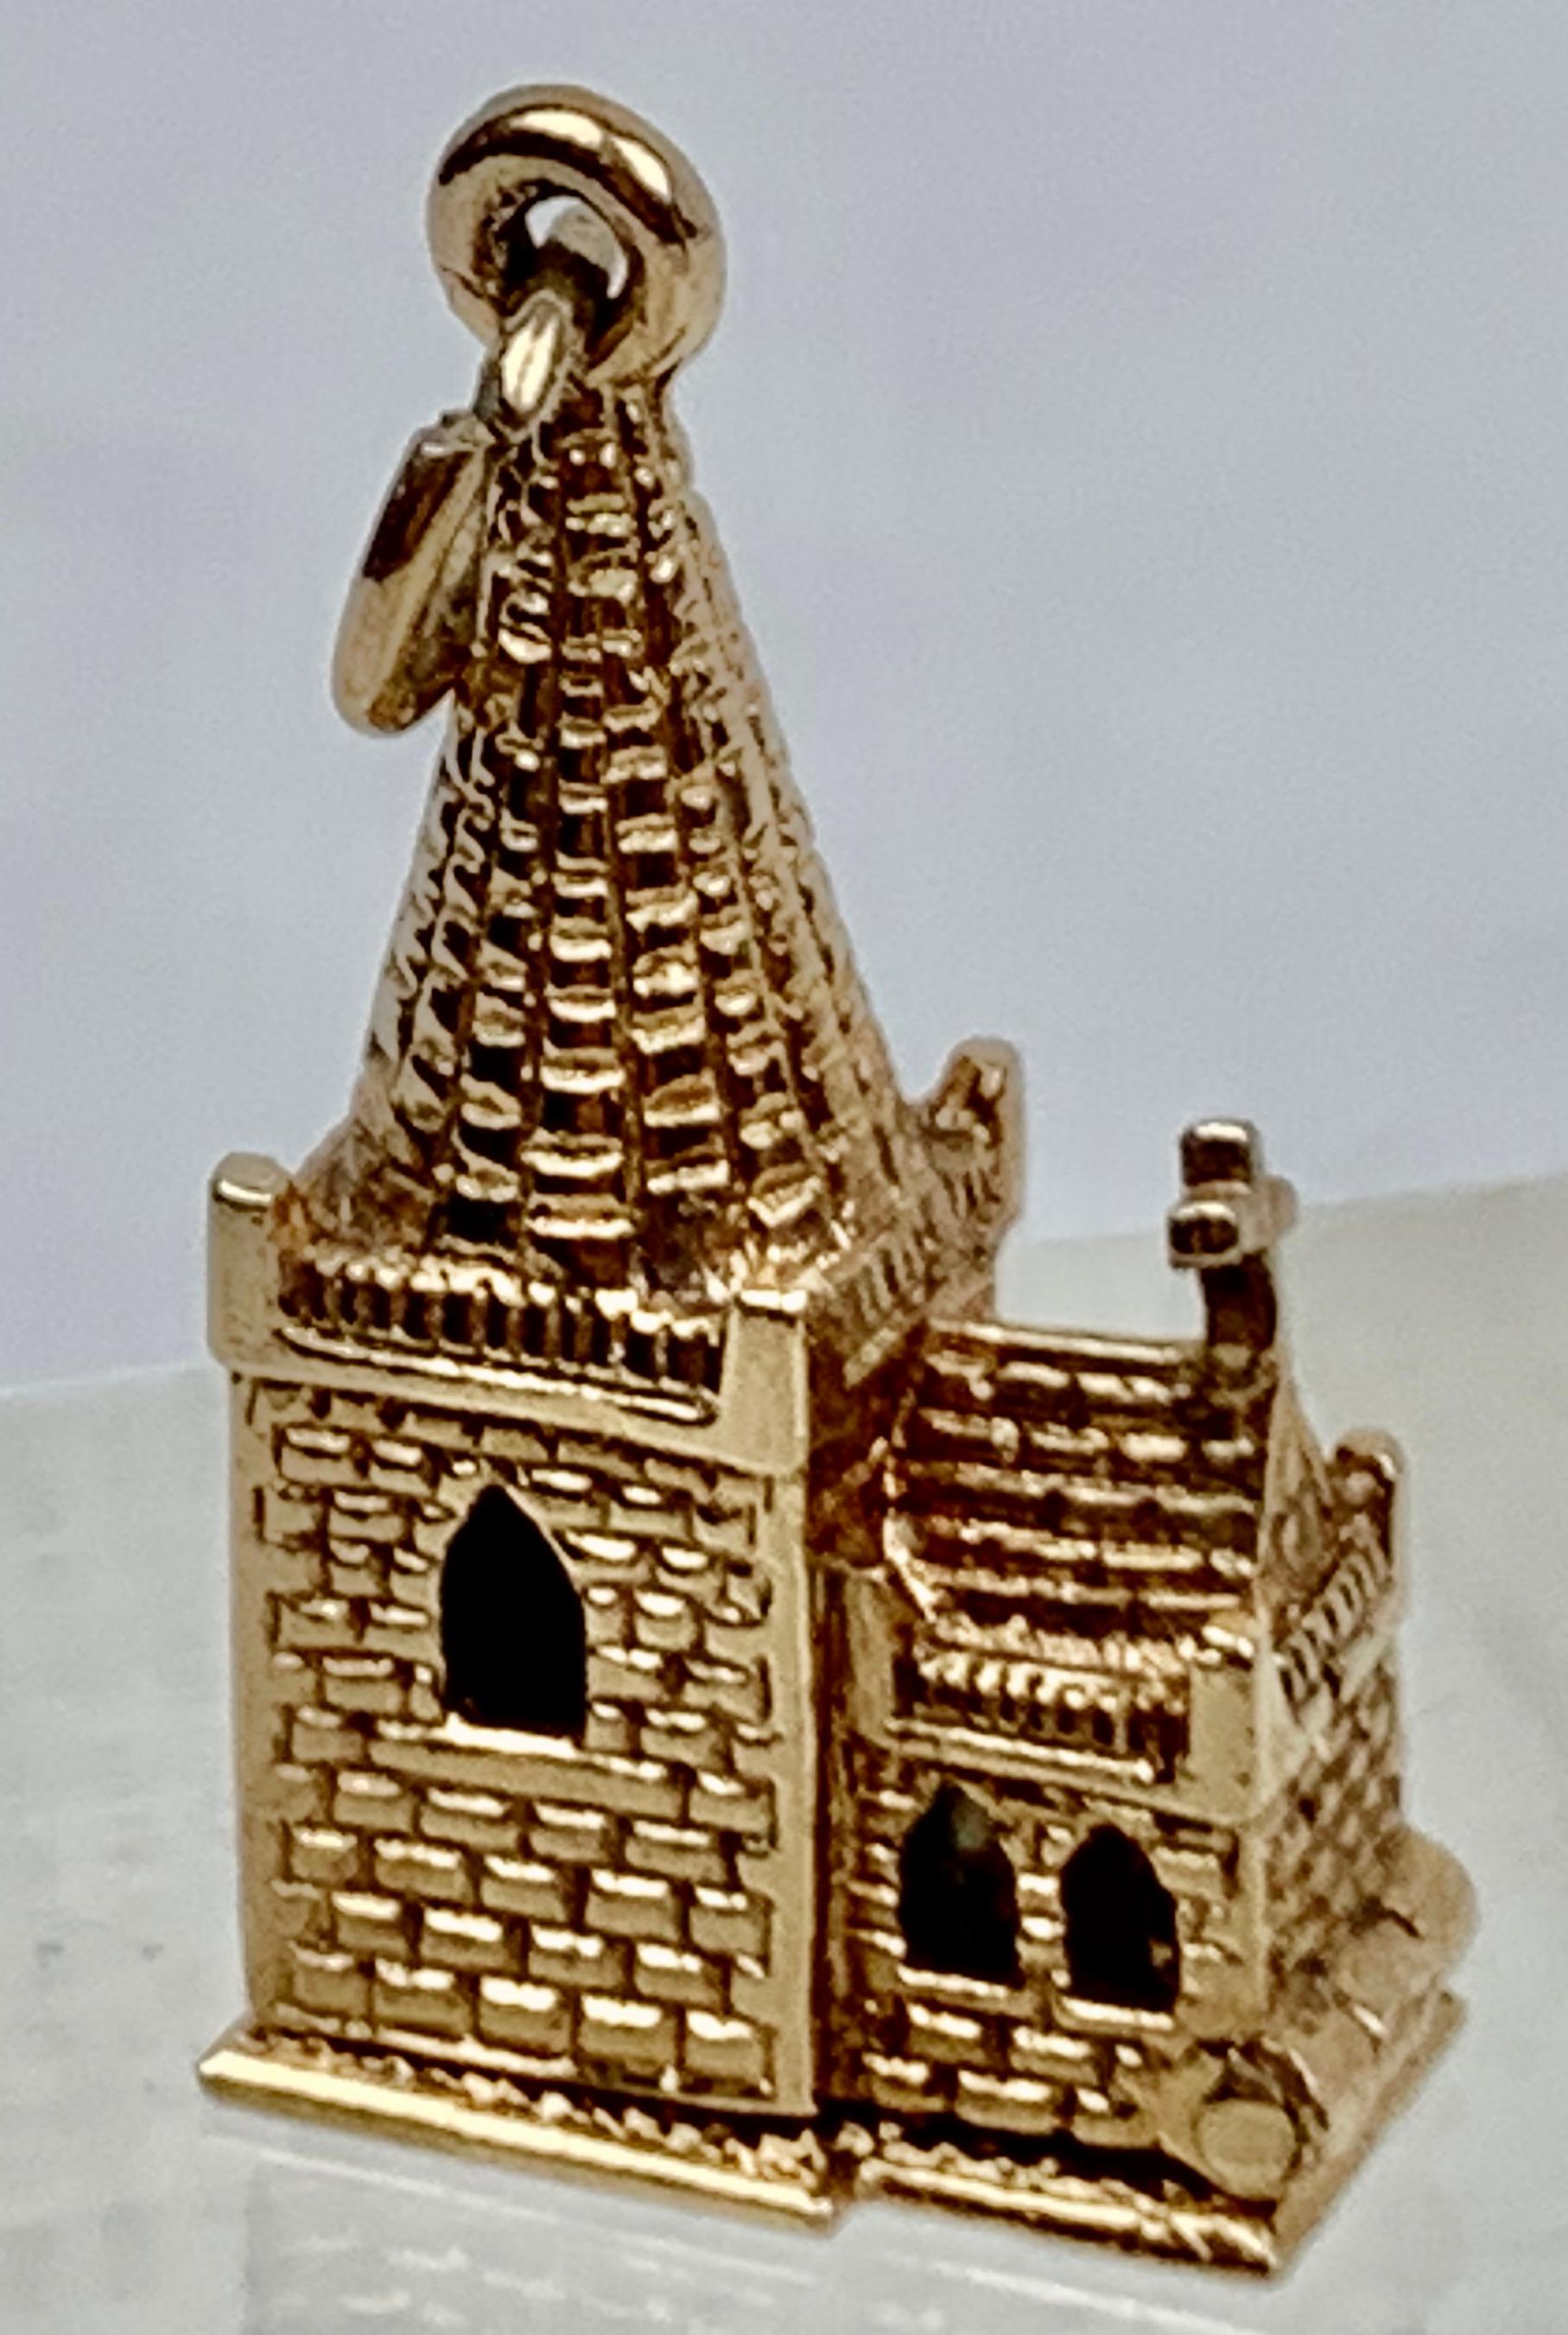 A solid gold charm of a church that opens to reveal a christening with a priest holding the infant while the parents look on.  The figures are colored with high fired enamel.
Hallmarked .375 (9 carat solid gold), Birmingham, England, 1976 on the